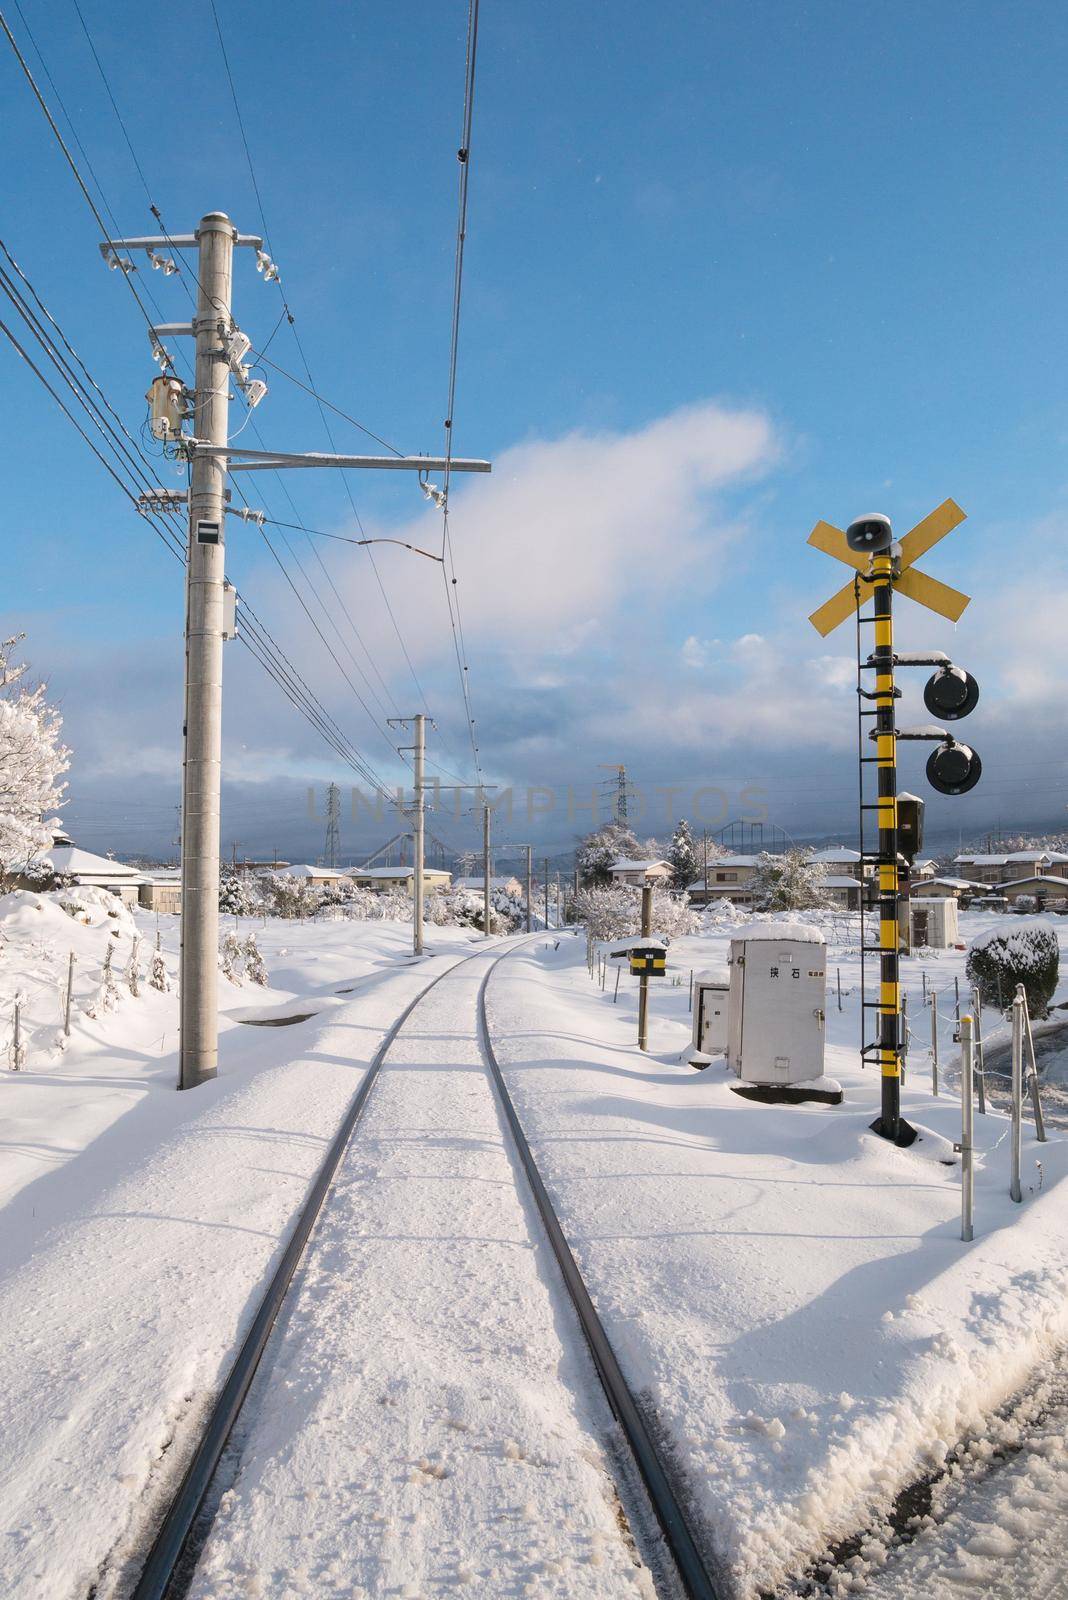 Railway track for local train with white snow fall in Japan